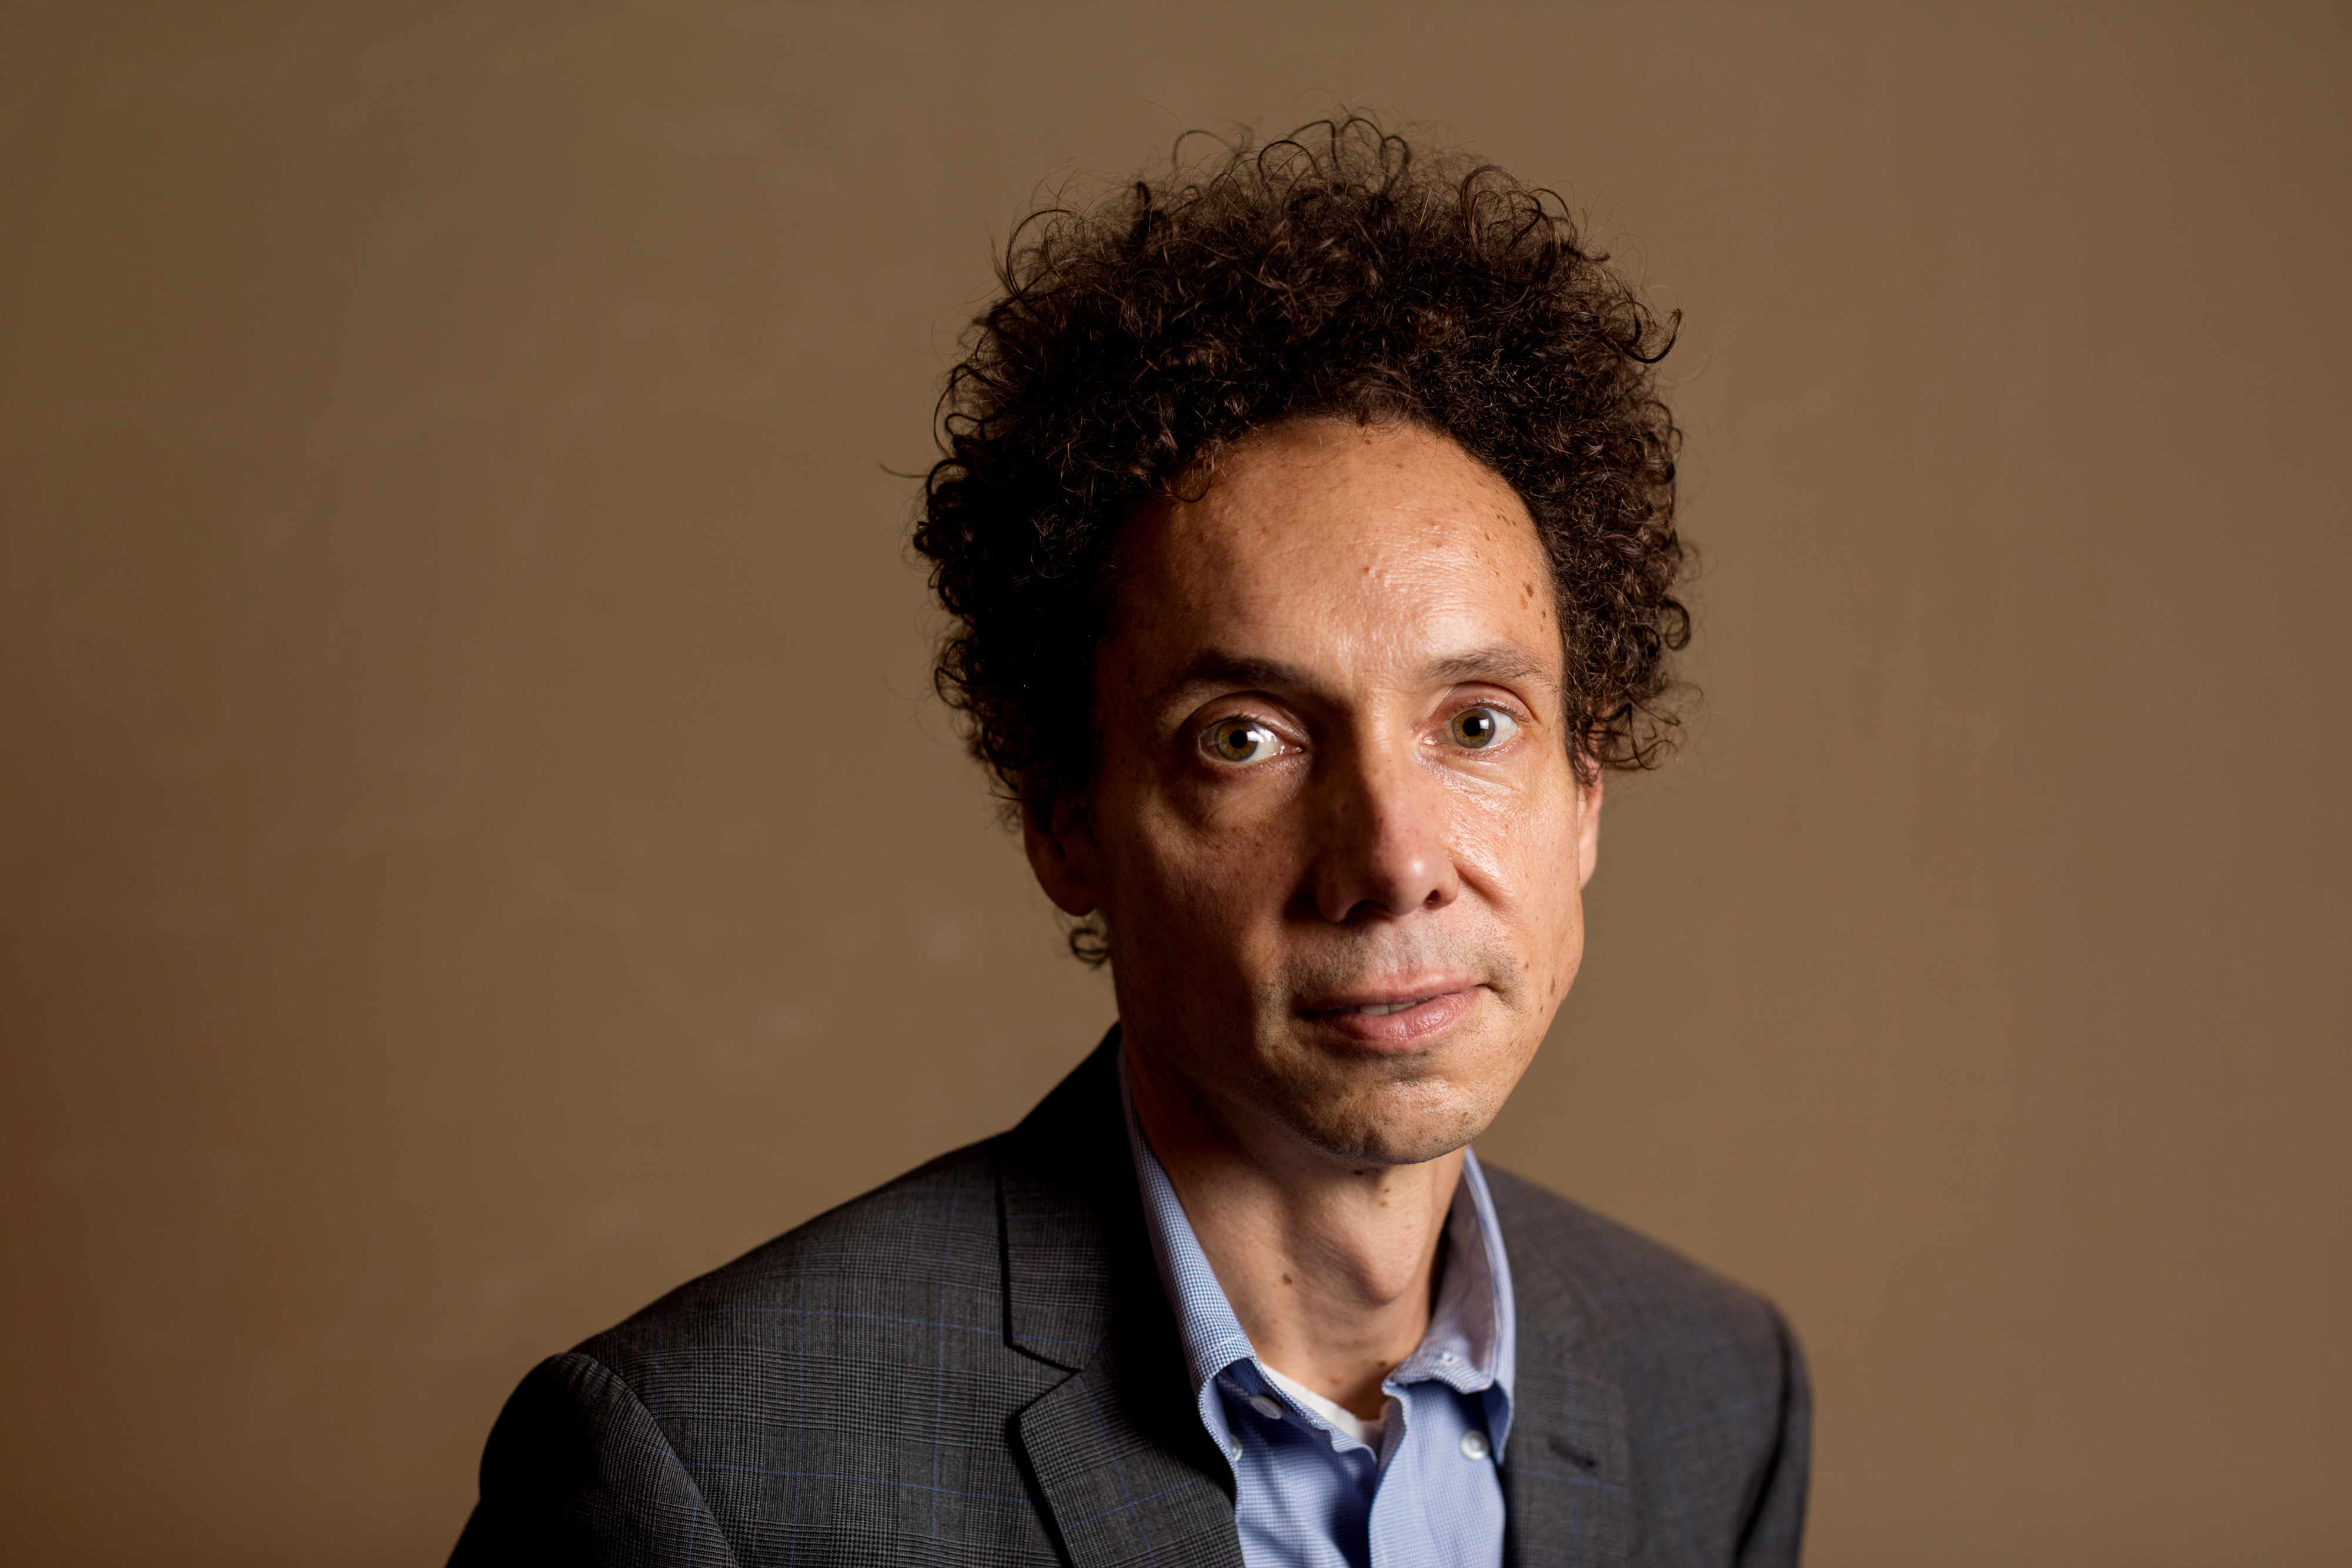 Malcolm Gladwell at the Barclays Asia Forum in Hong Kong on Nov. 6, 2014. (Jerome Favre—Bloomberg via Getty Images)